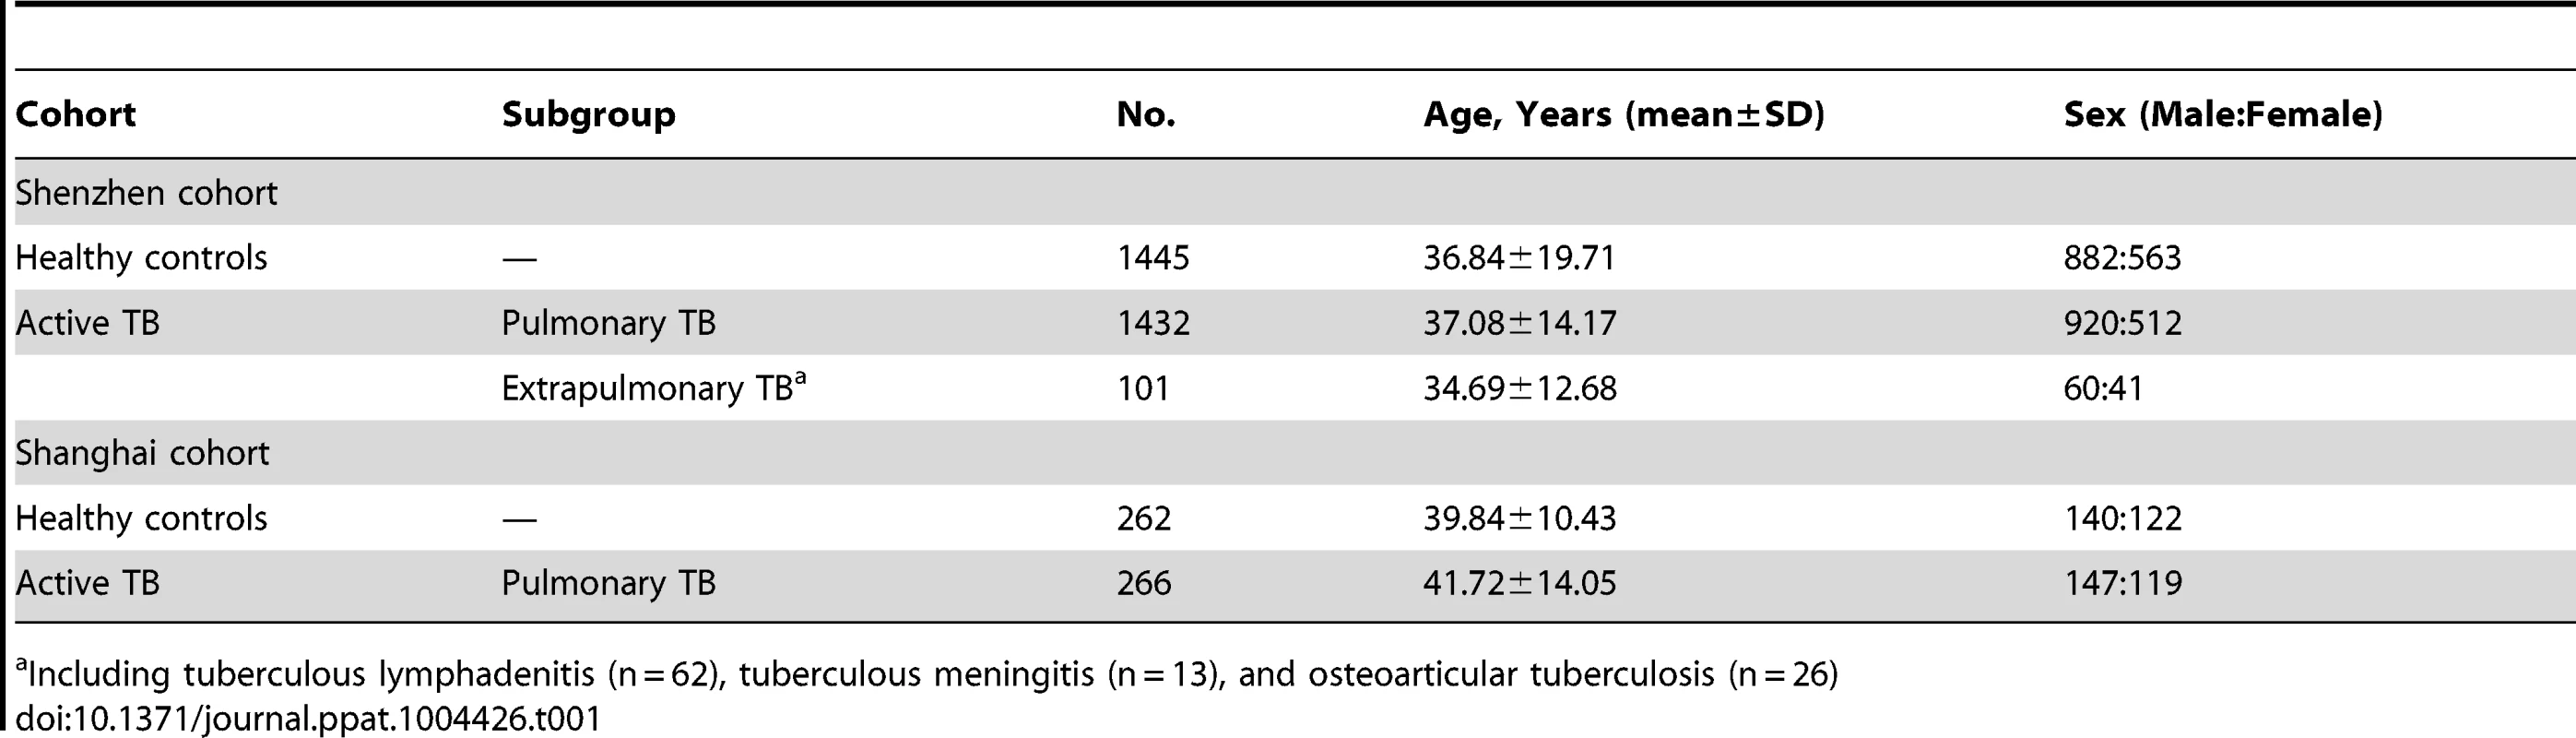 Characteristics of patients with active TB and healthy controls in multiple cohorts.